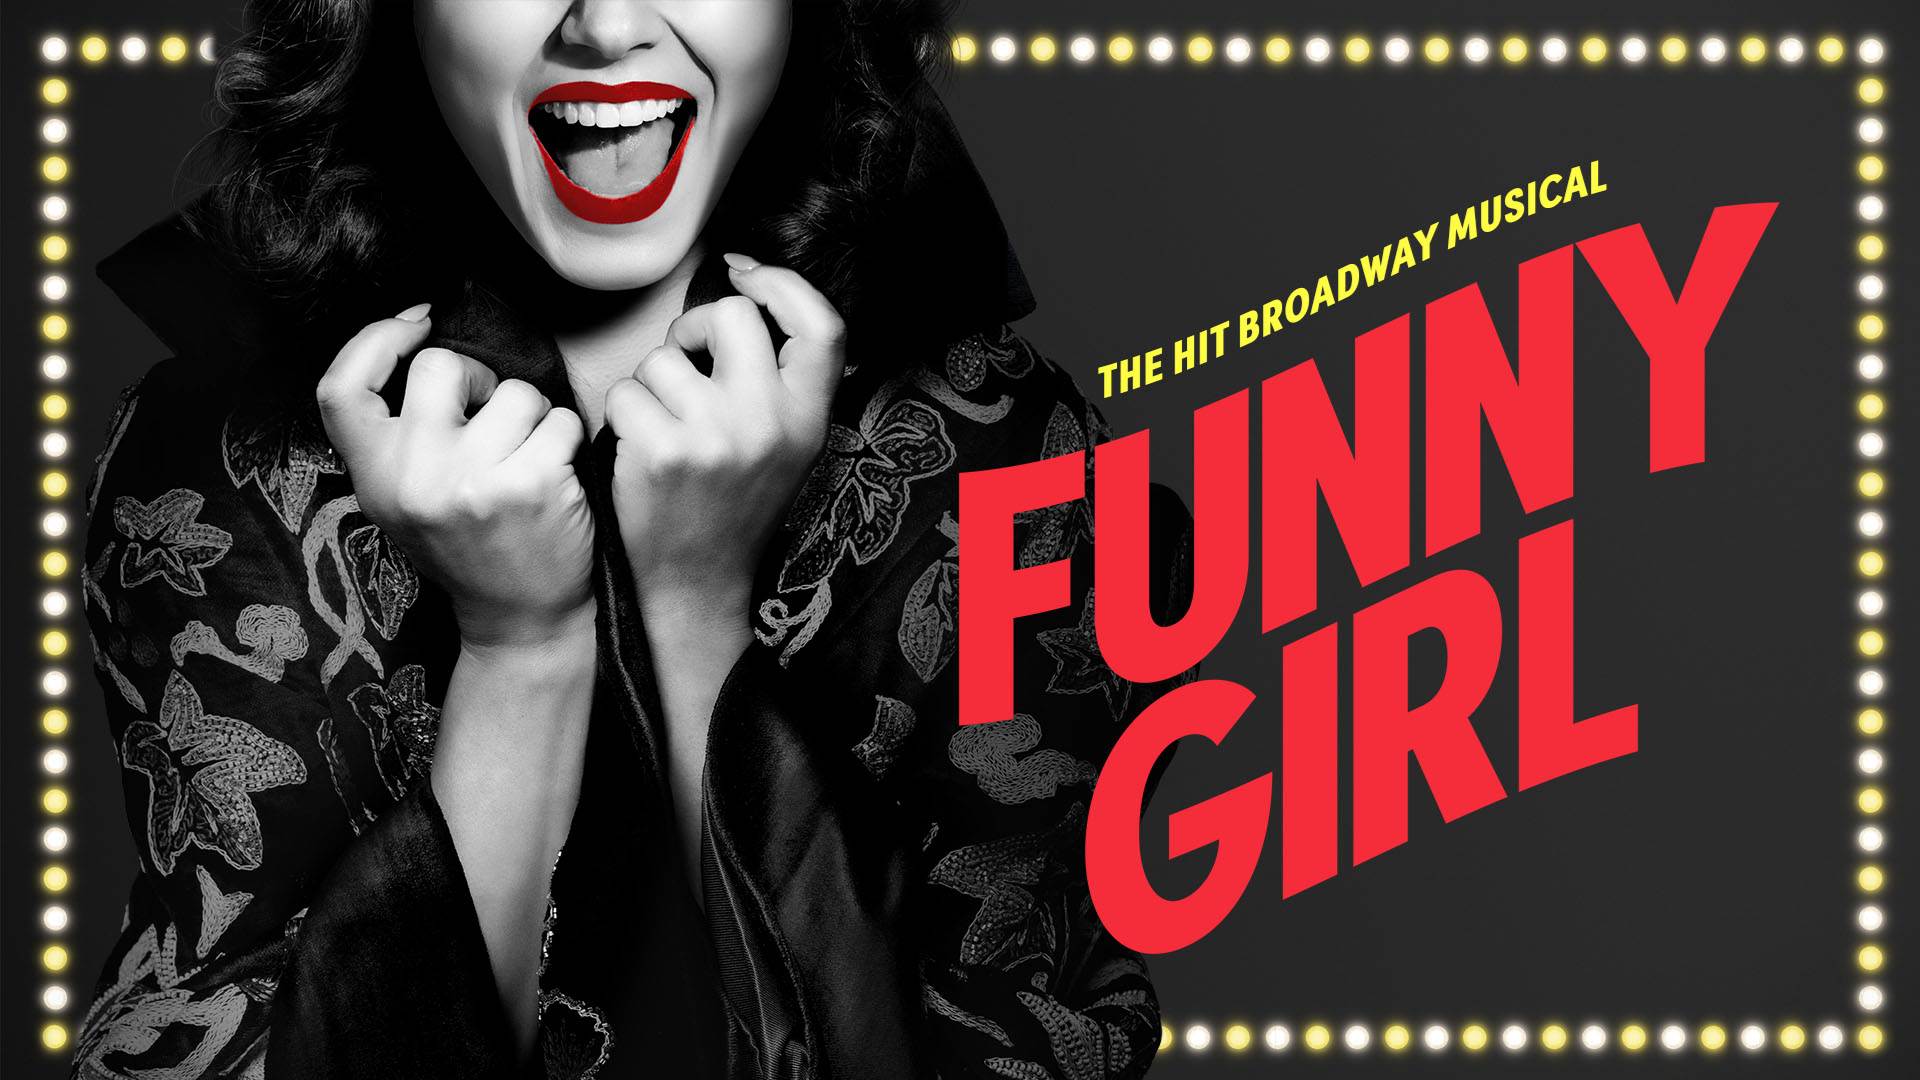 Banner text reads: "The Hit Broadway Musical Funny Girl" in bold red and gold lettering. On the left A black and white photo of a laughing woman. The top half of her face is cropped out of the banner and her lipstick is red. There is a border of gold and white marquee lights.